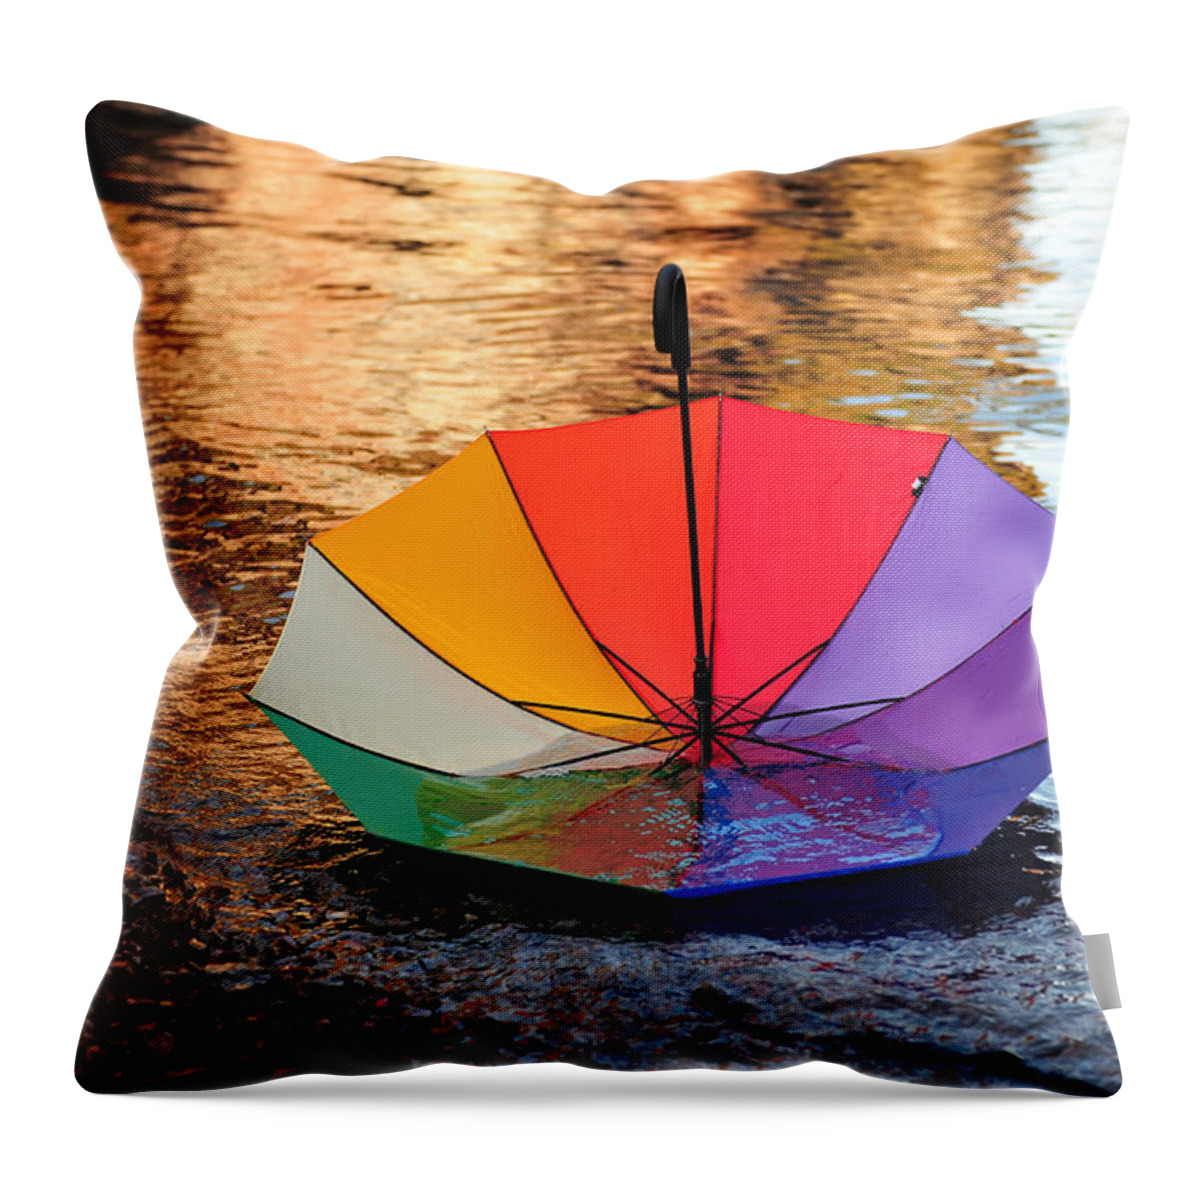 Autumn Throw Pillow featuring the photograph In Trouble by Randi Grace Nilsberg